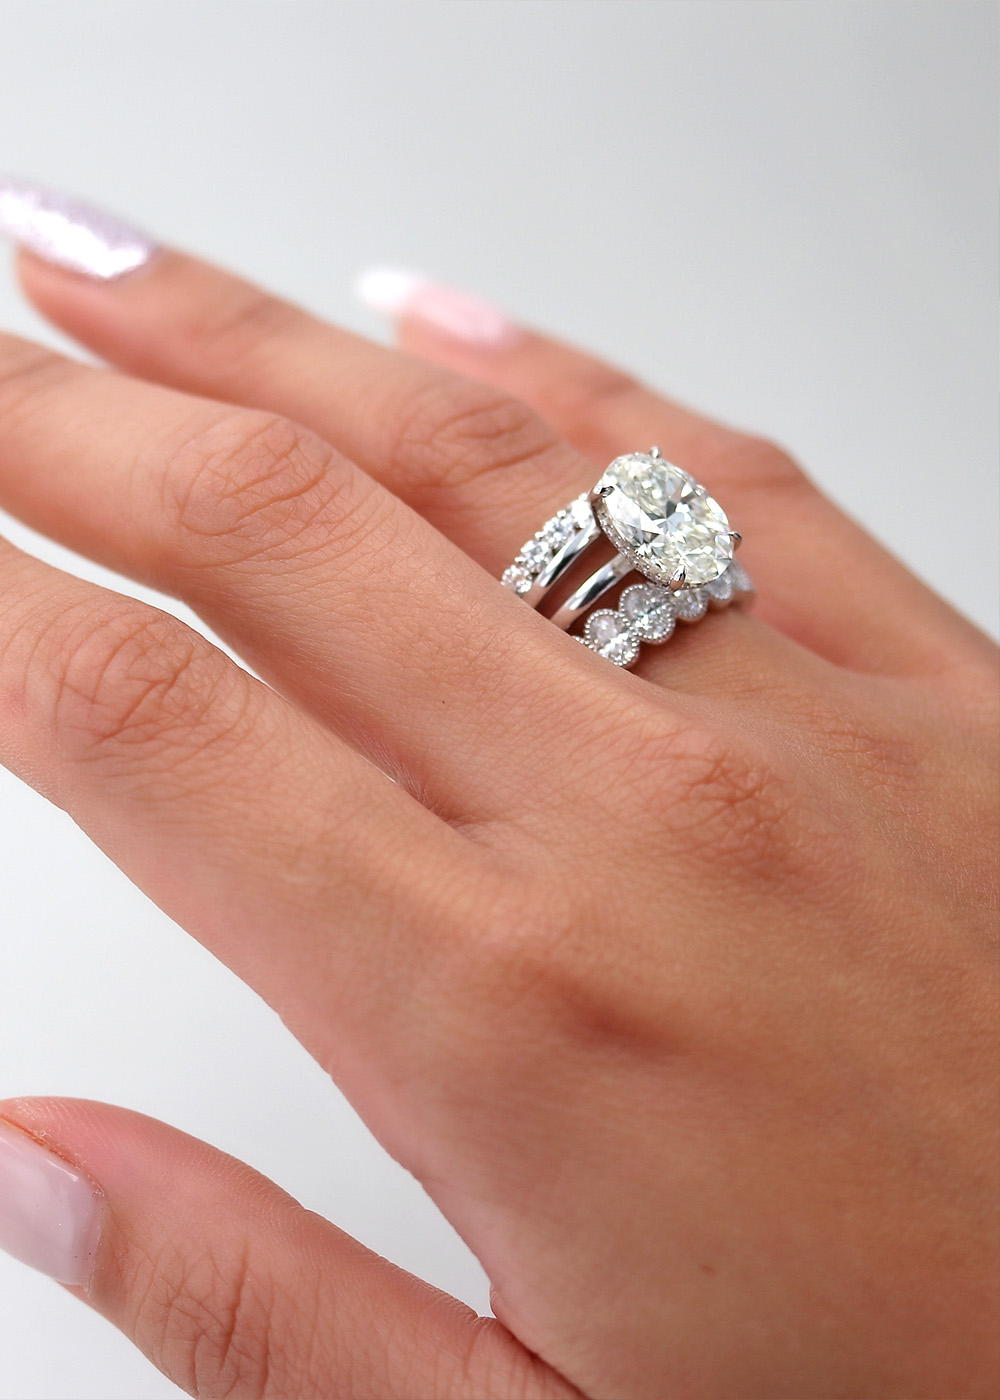 Engagement Ring Collection at La Mine d'Or Jewellers Moncton & Halifax